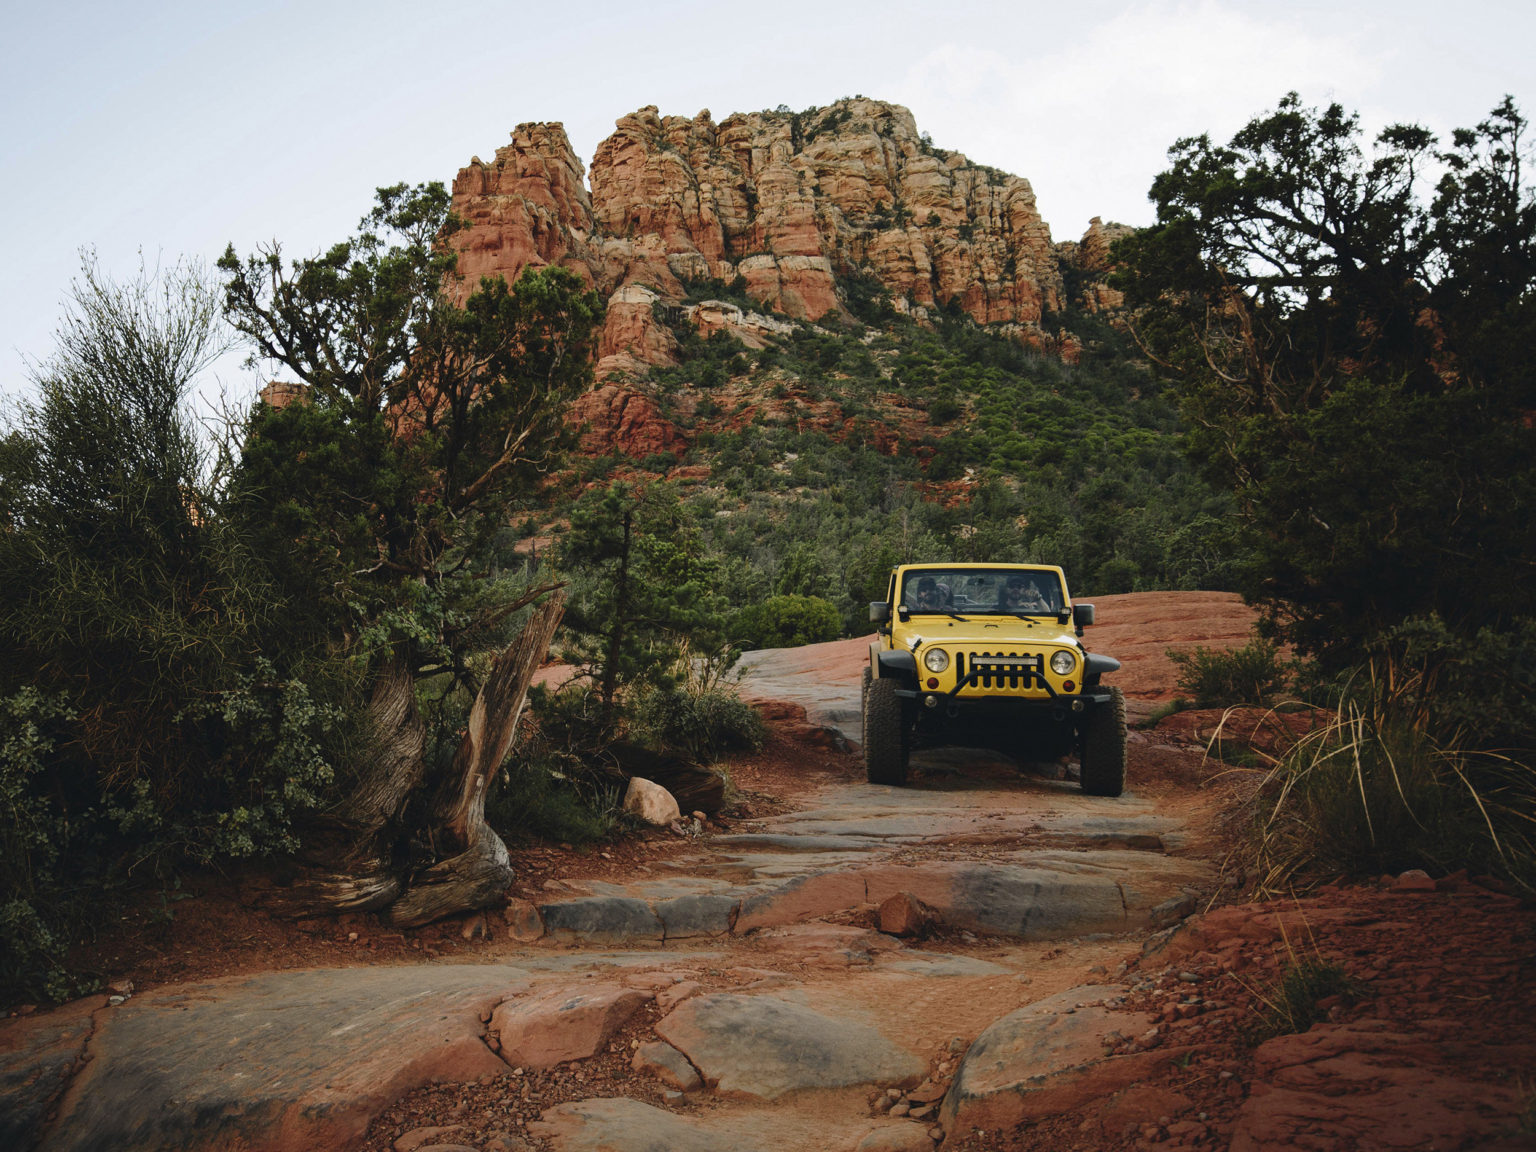 Jeep Jamboree events allow Jeep drivers to off-road and enjoy the comraderie that comes with owning the same style of vehicle.